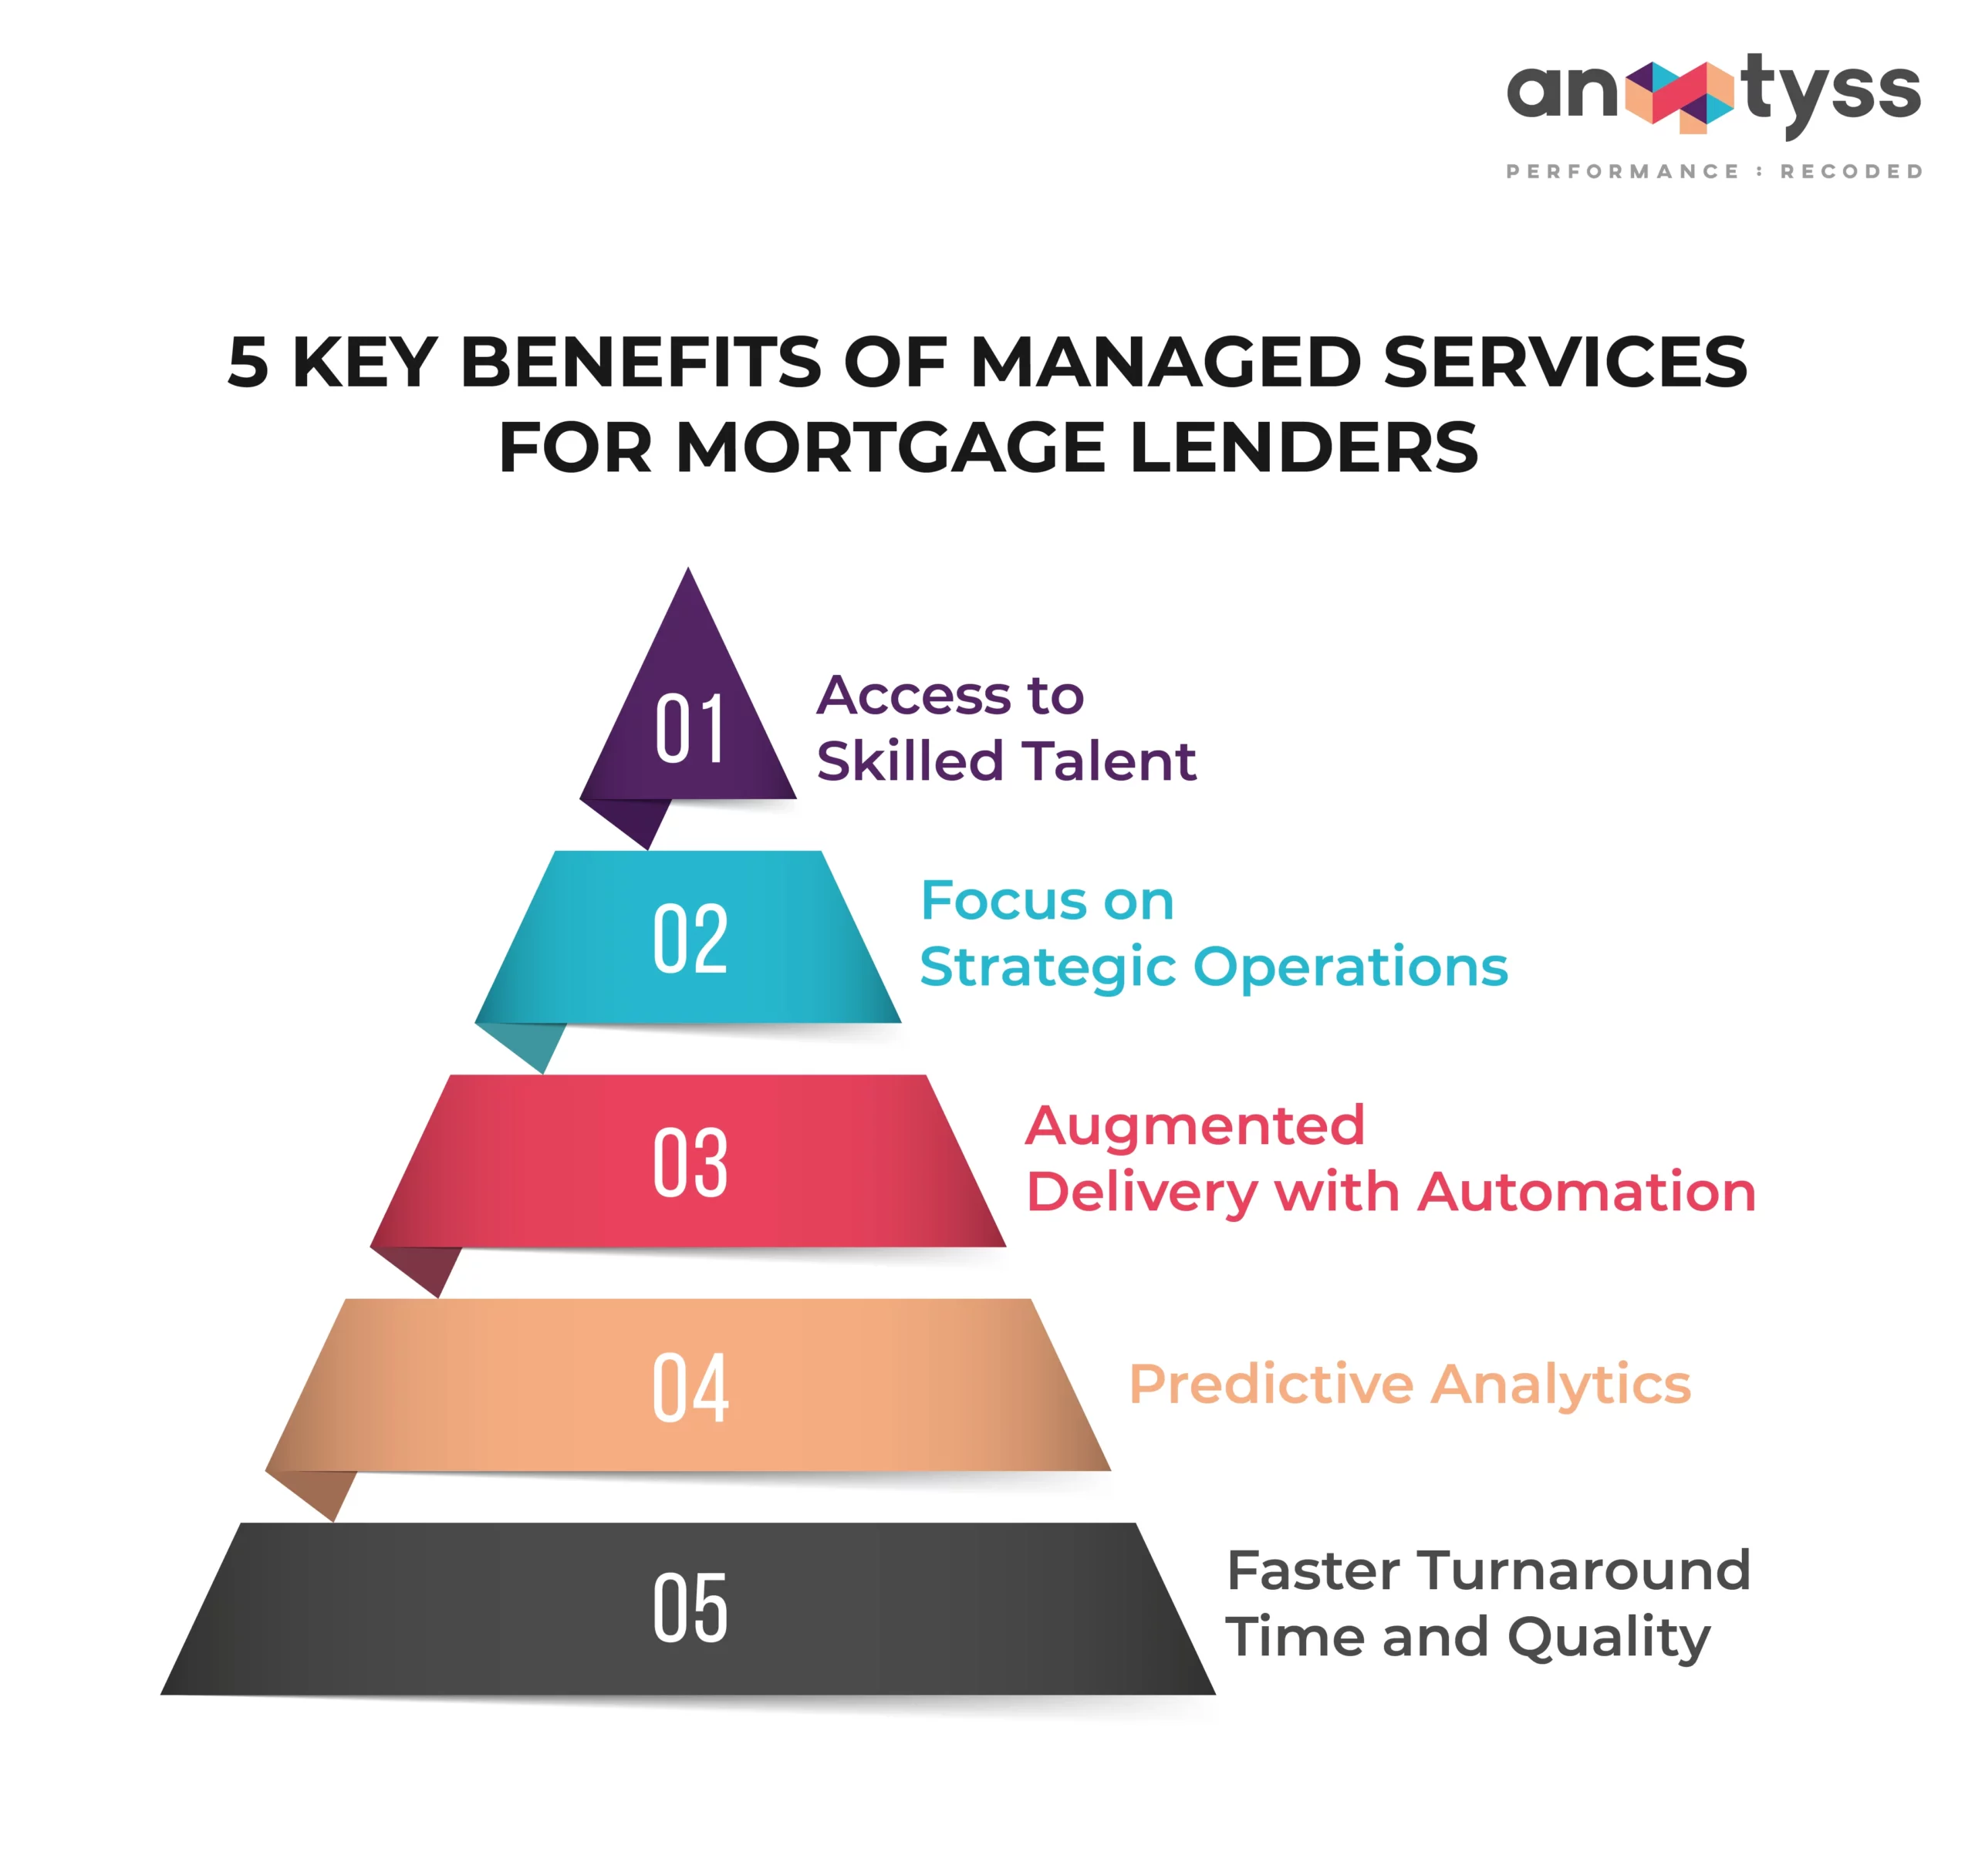 5 Key Benefits of Managed Services